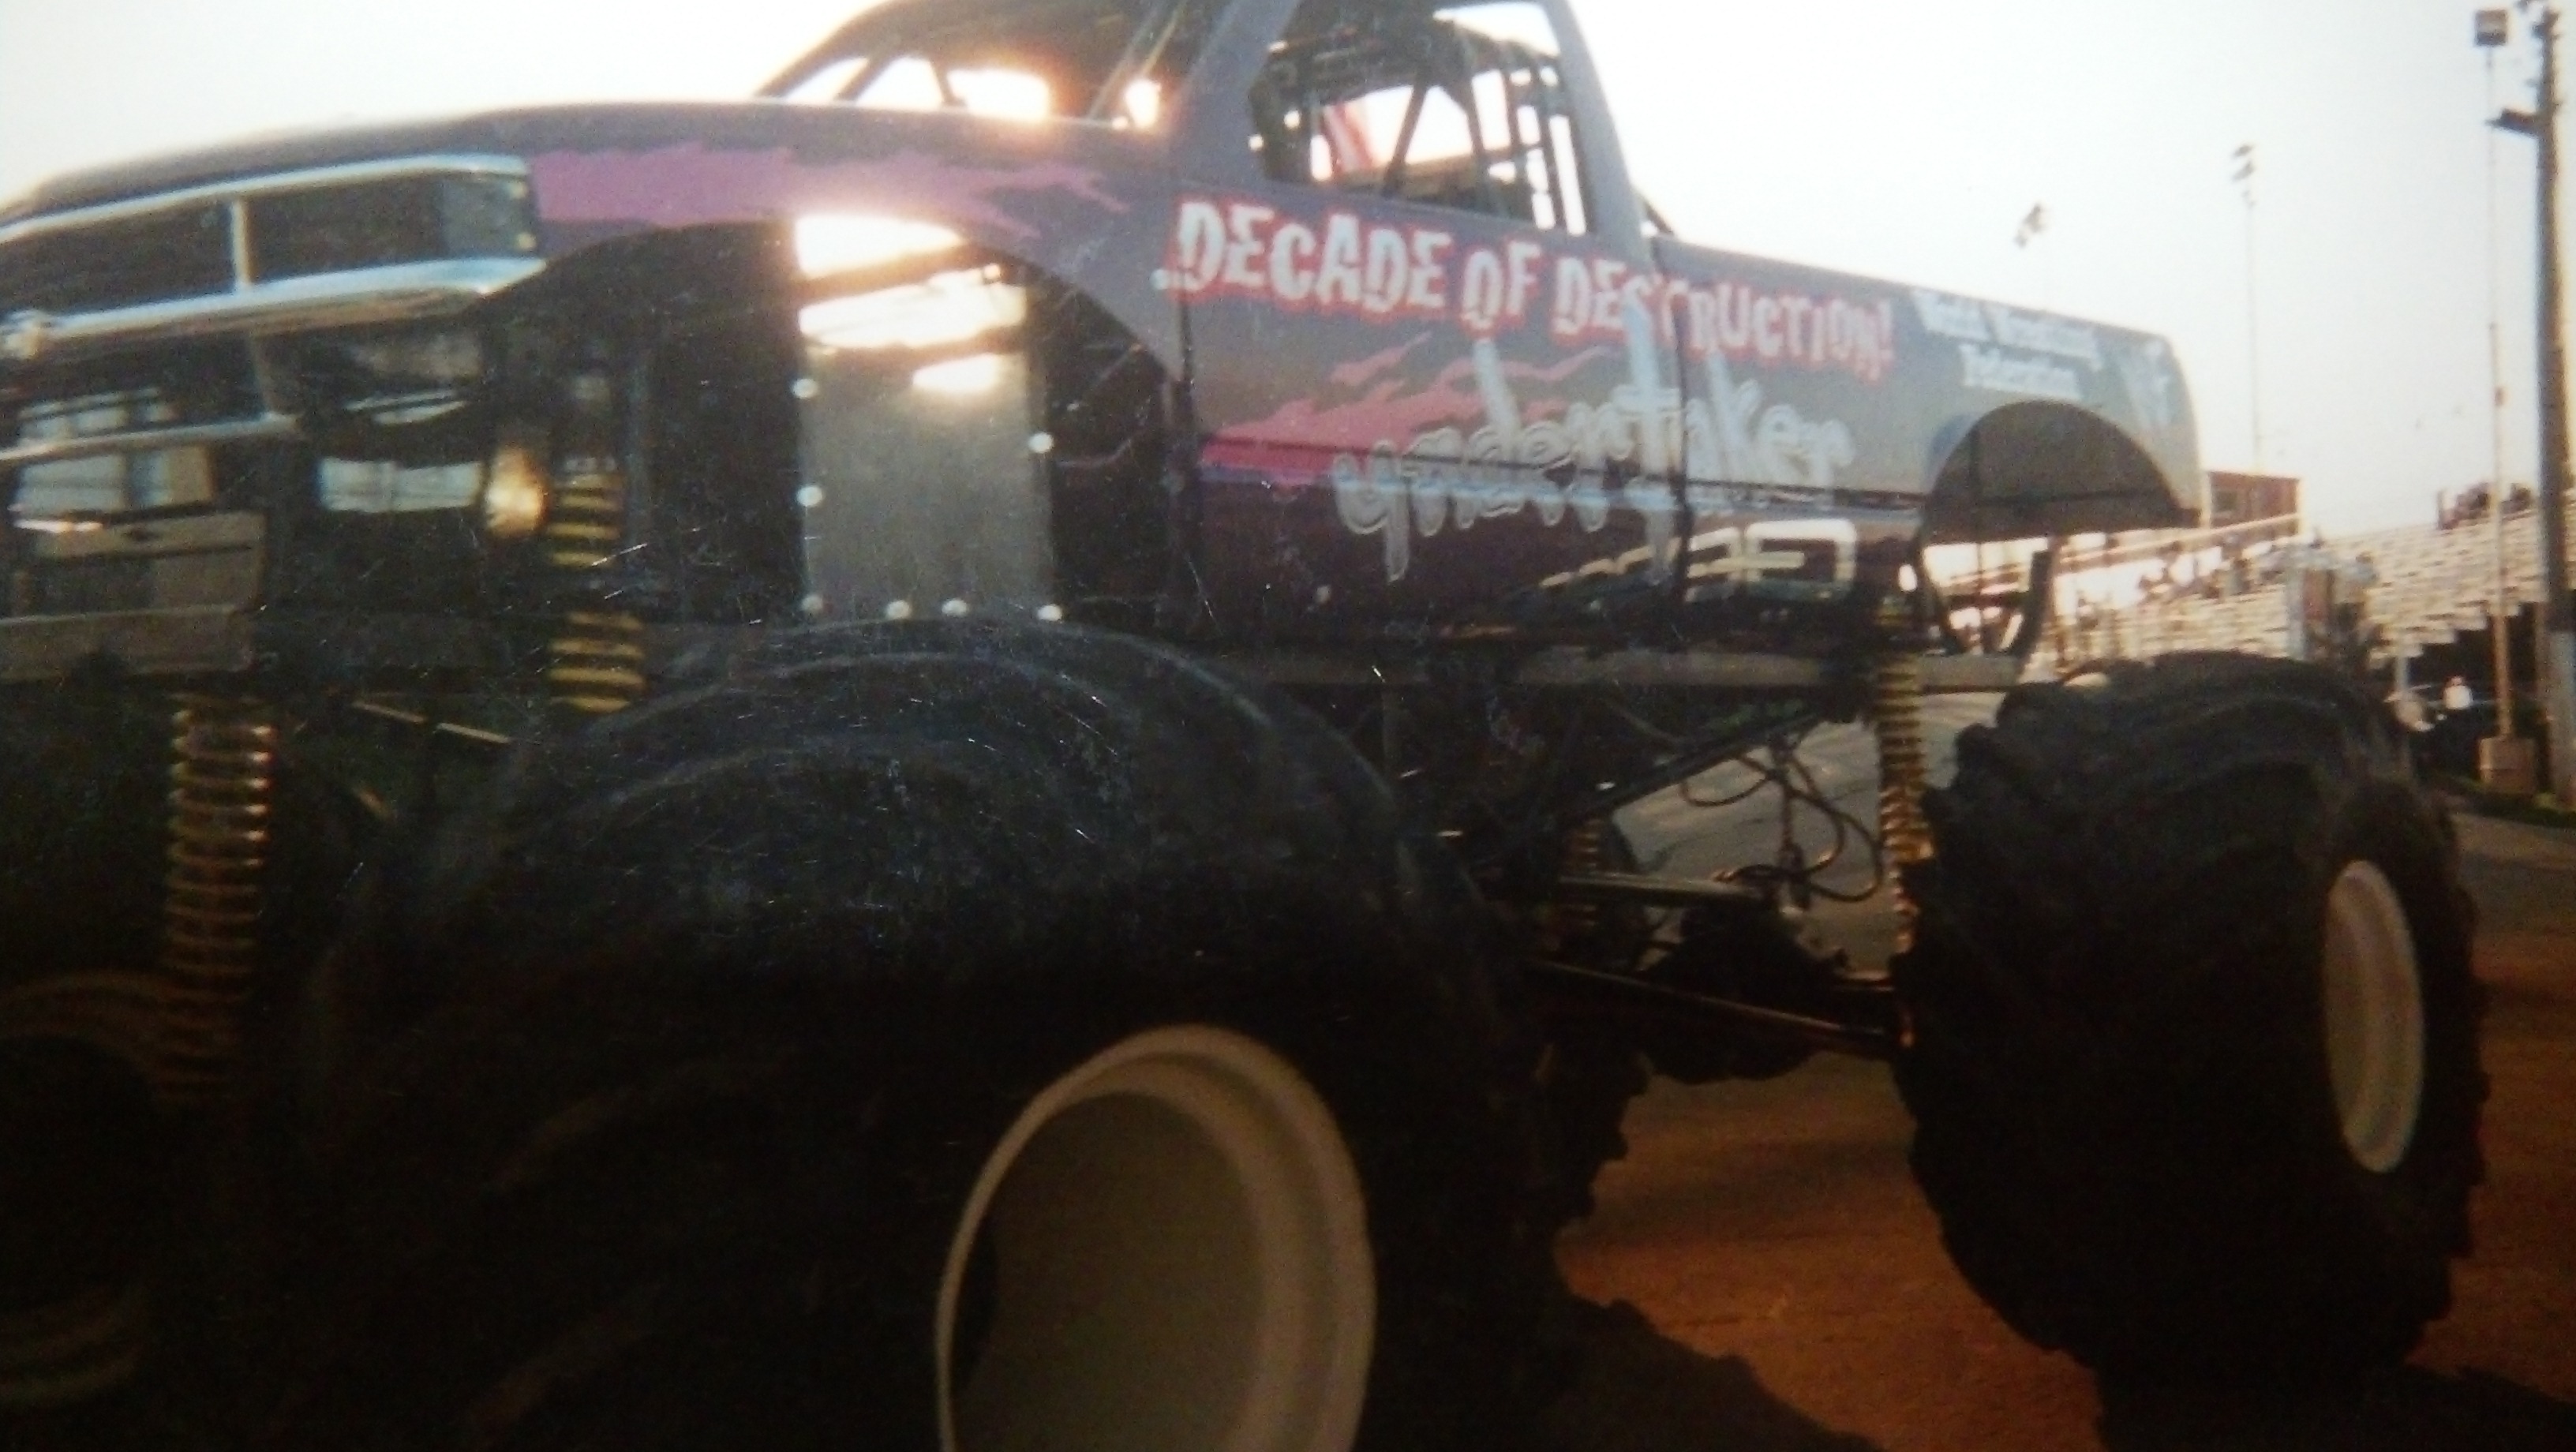 WWE Brothers Of Destruction monster truck. Sept 2001,the weekend after the Sept Trade Tower Attacks.